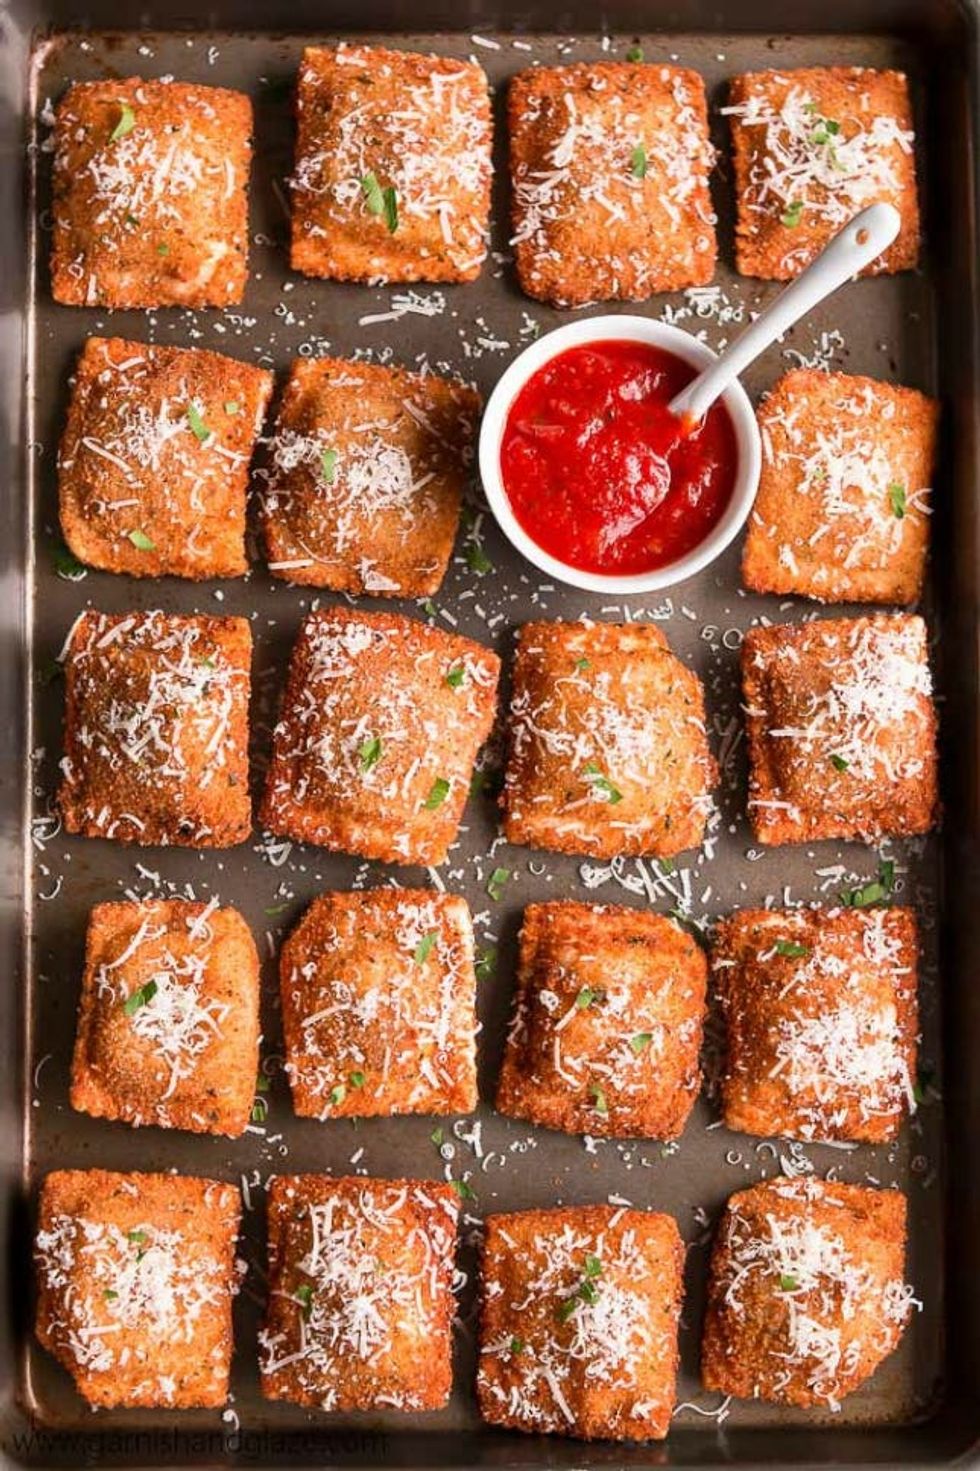 https://www.brit.co/media-library/toasted-ravioli-christmas-party-recipes.jpg?id=20885867&width=980